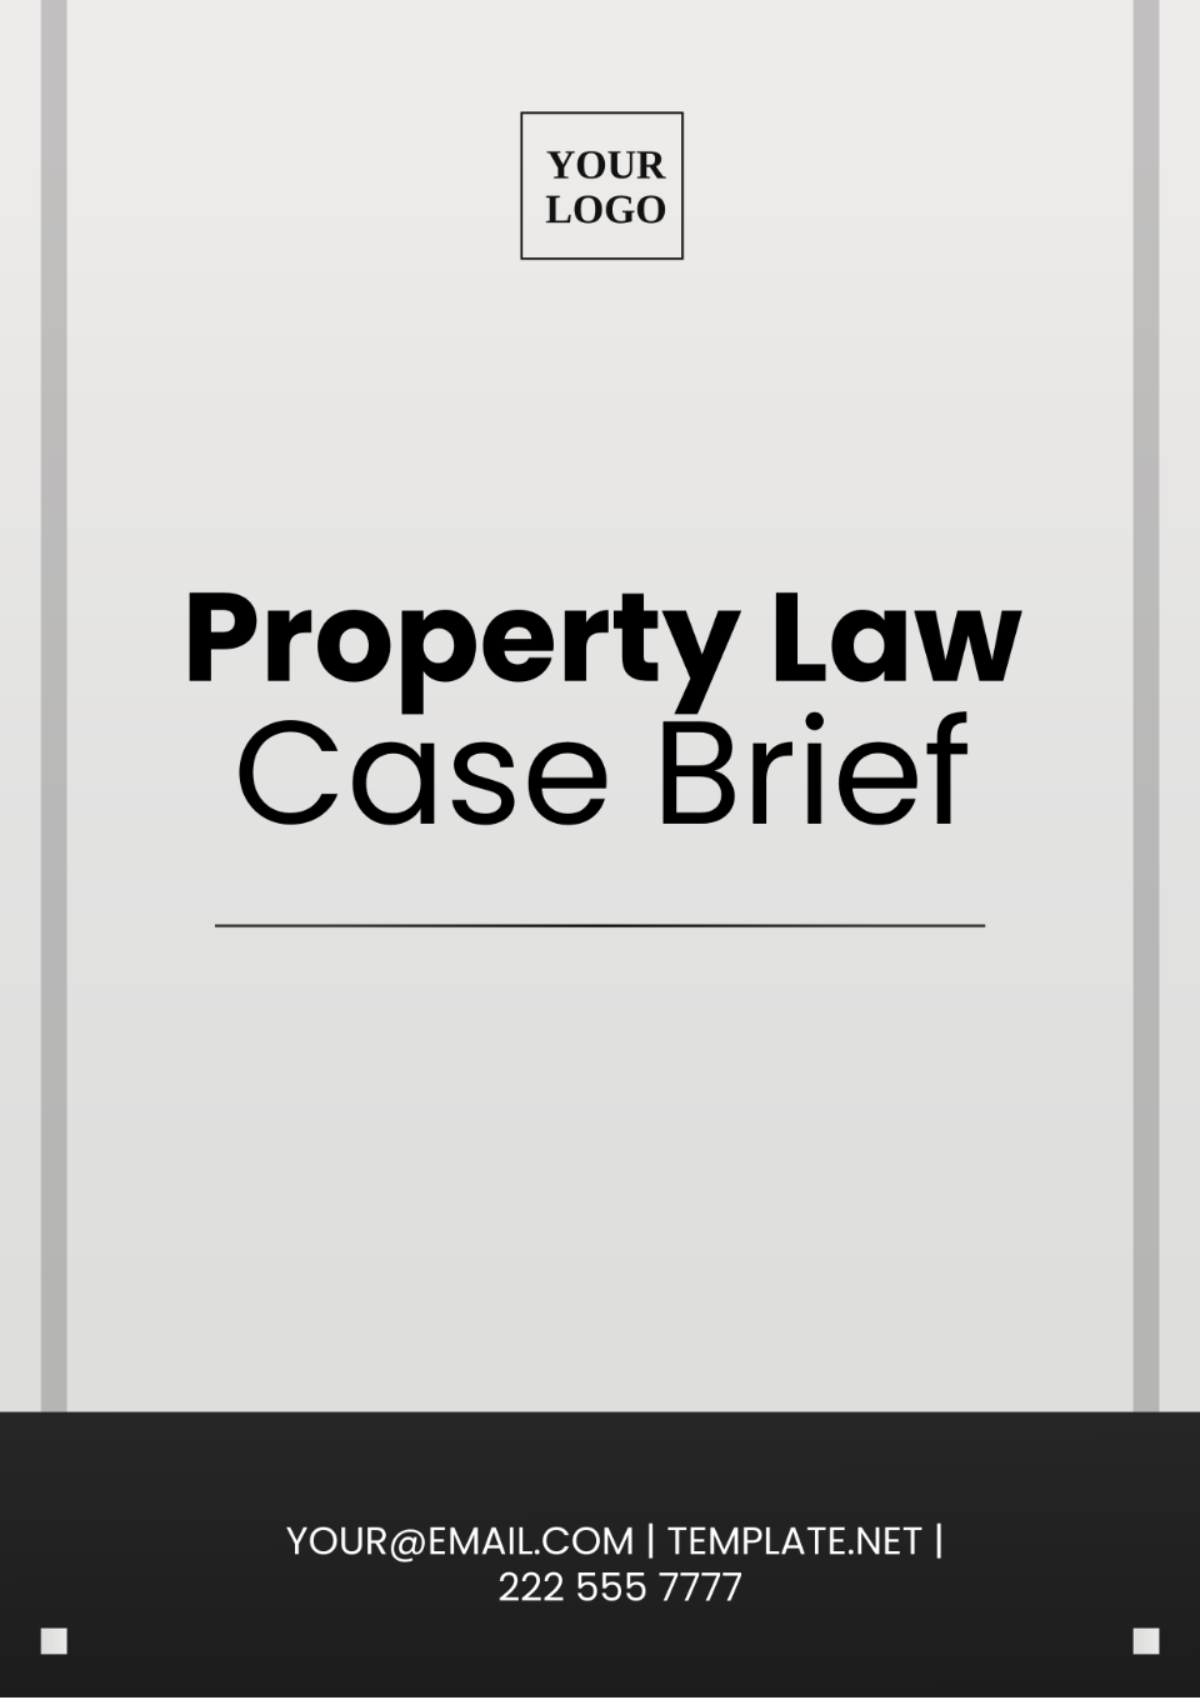 Free Property Law Case Brief Template